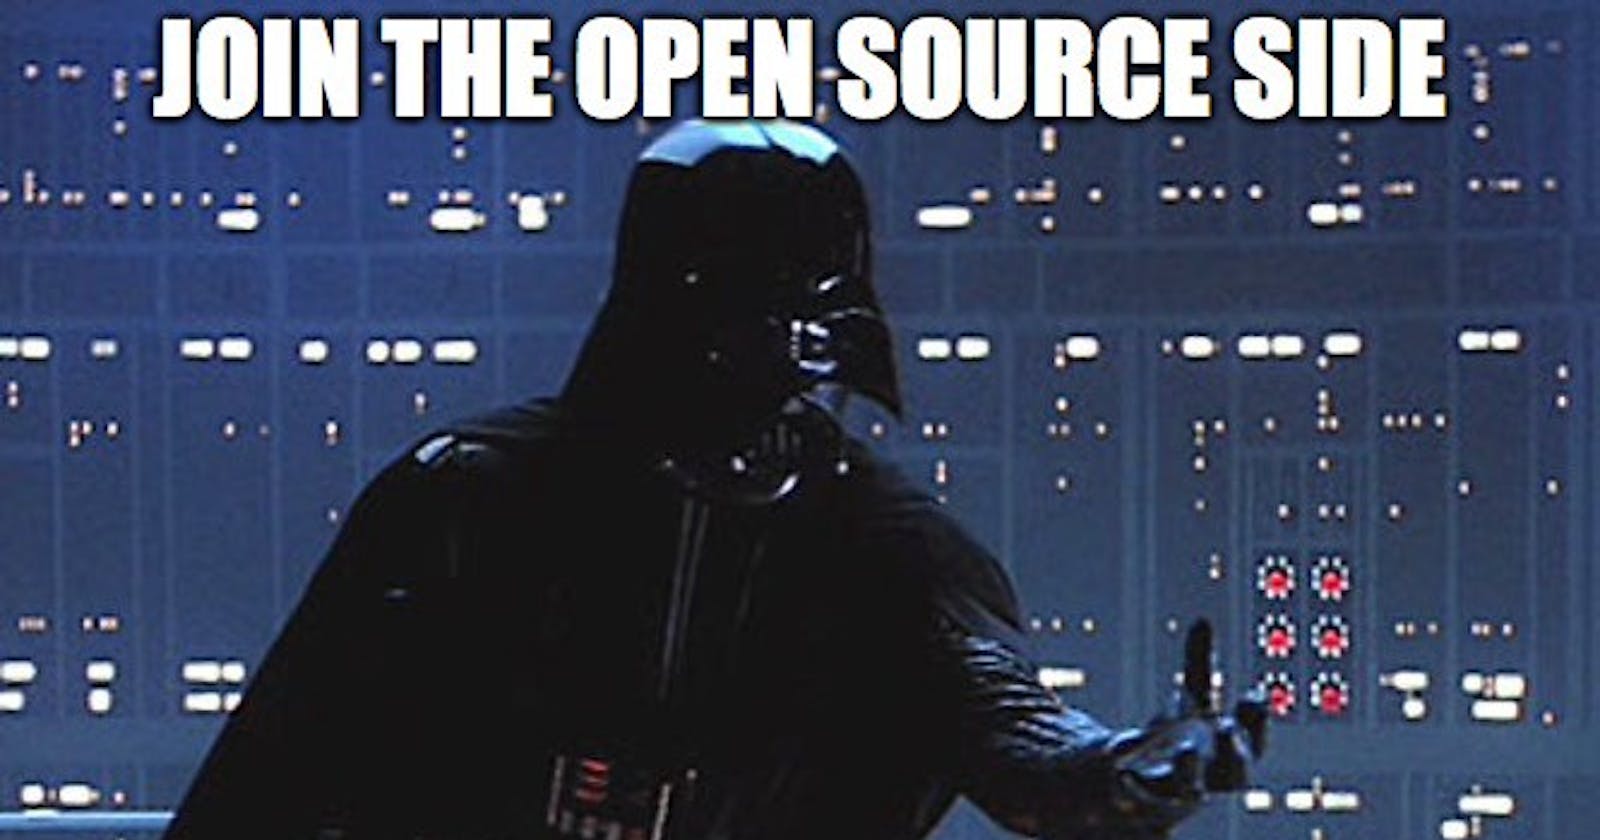 How Open Source turned my Life Around.